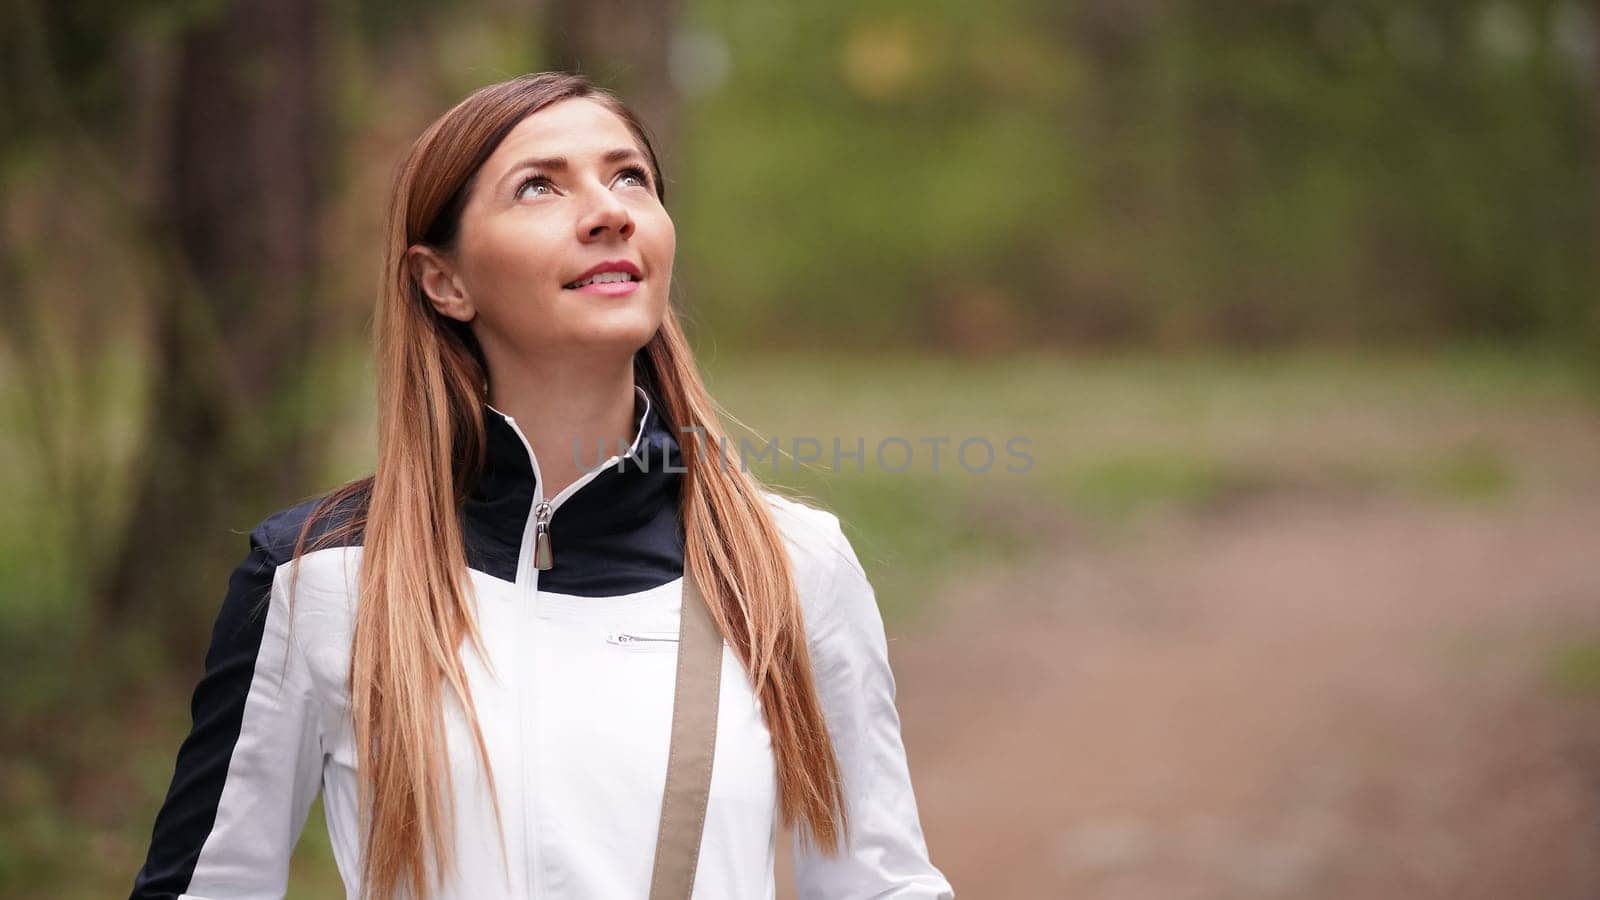 Young woman with long hair, wearing white jacket, looking up the trees while walking in forest. Space for text right side